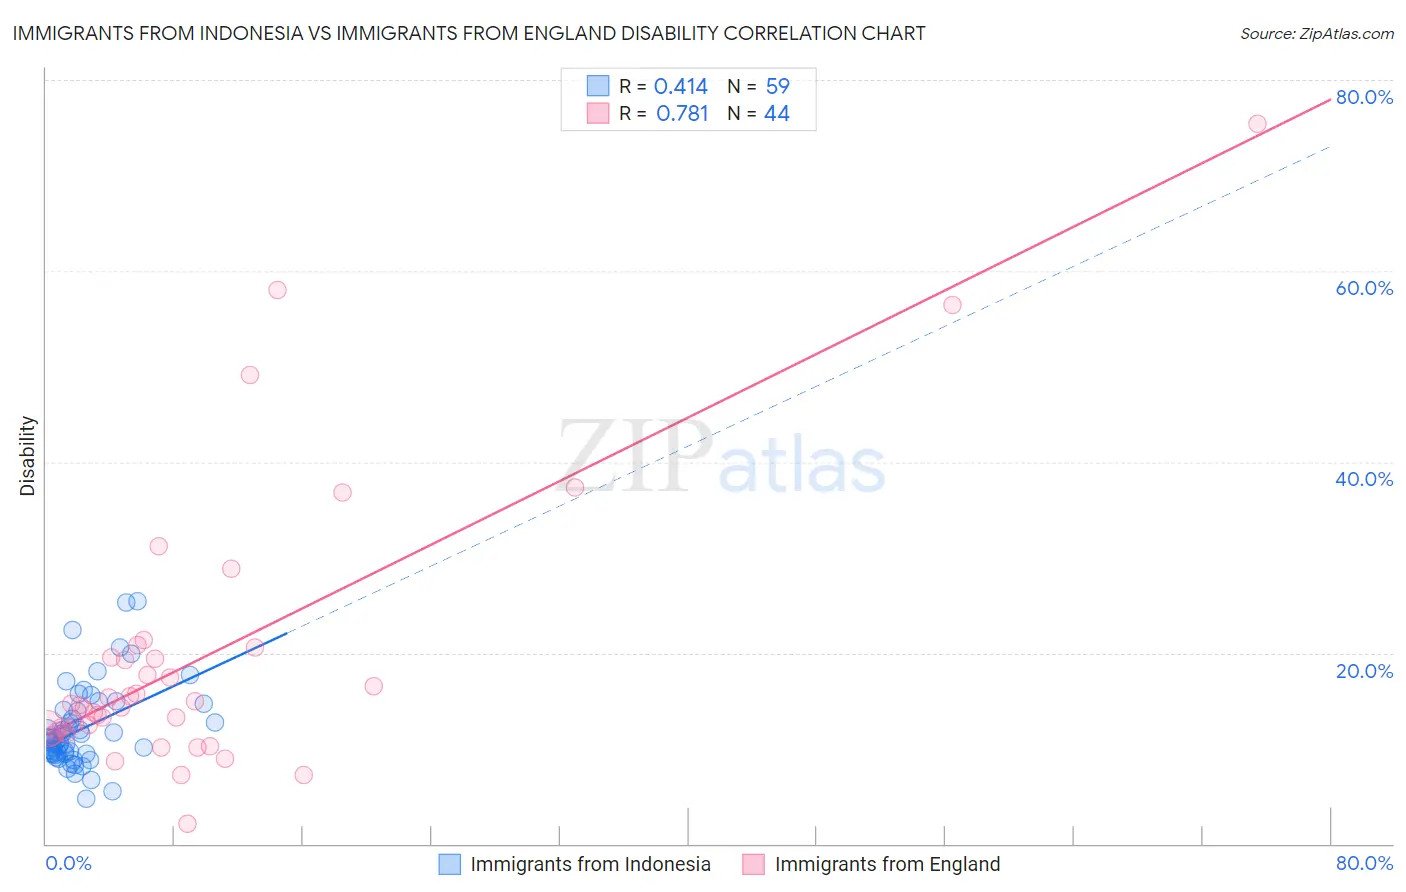 Immigrants from Indonesia vs Immigrants from England Disability